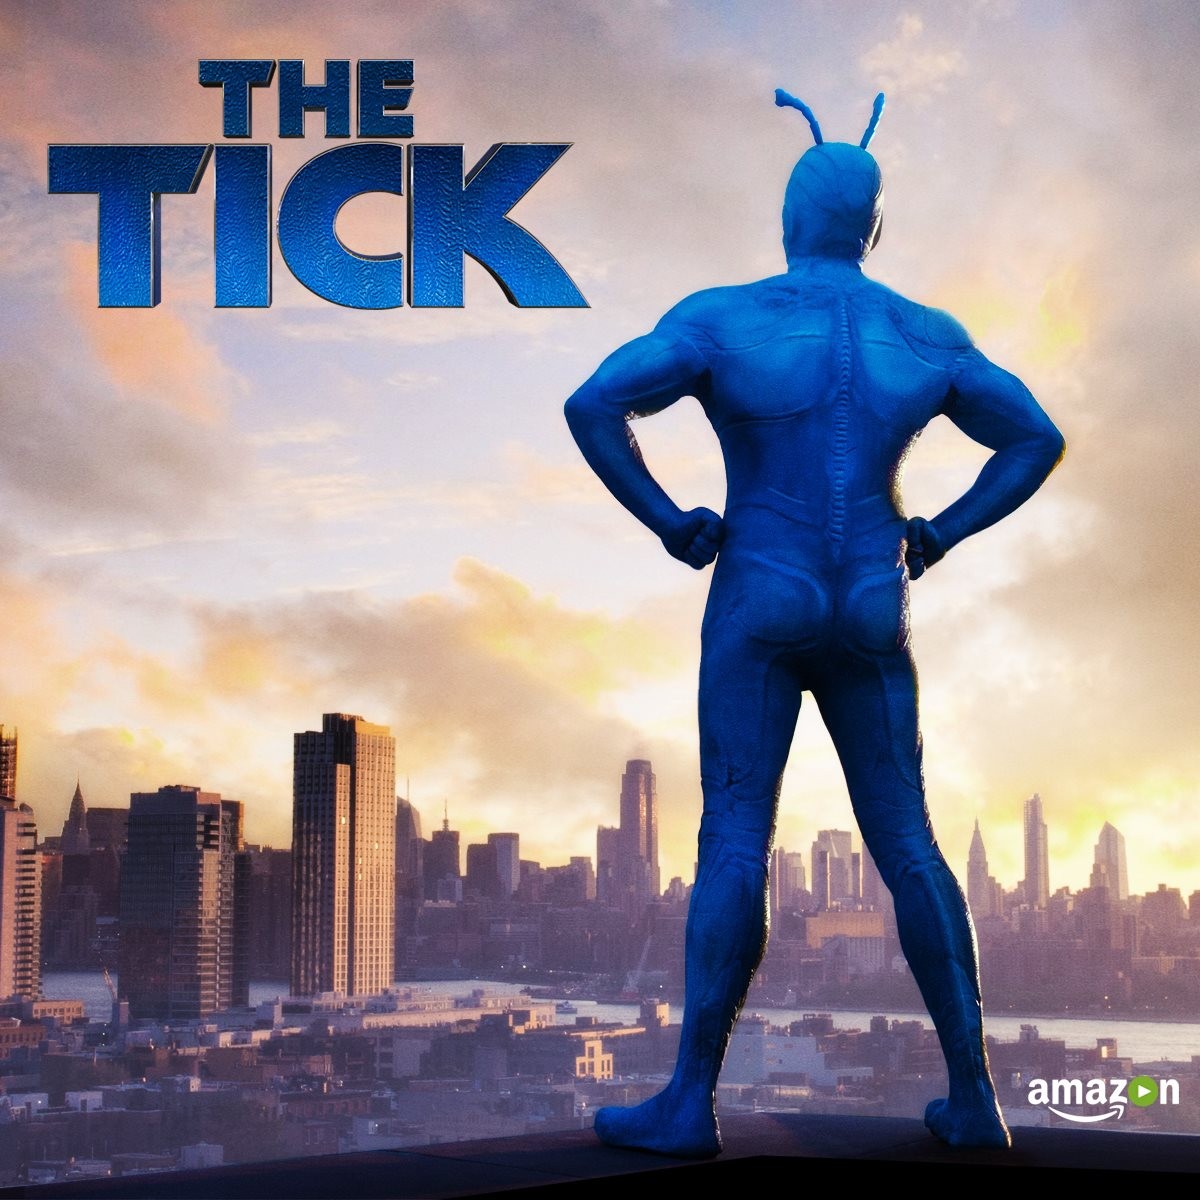 The Wertzone: Amazon releases pilot episode of THE TICK